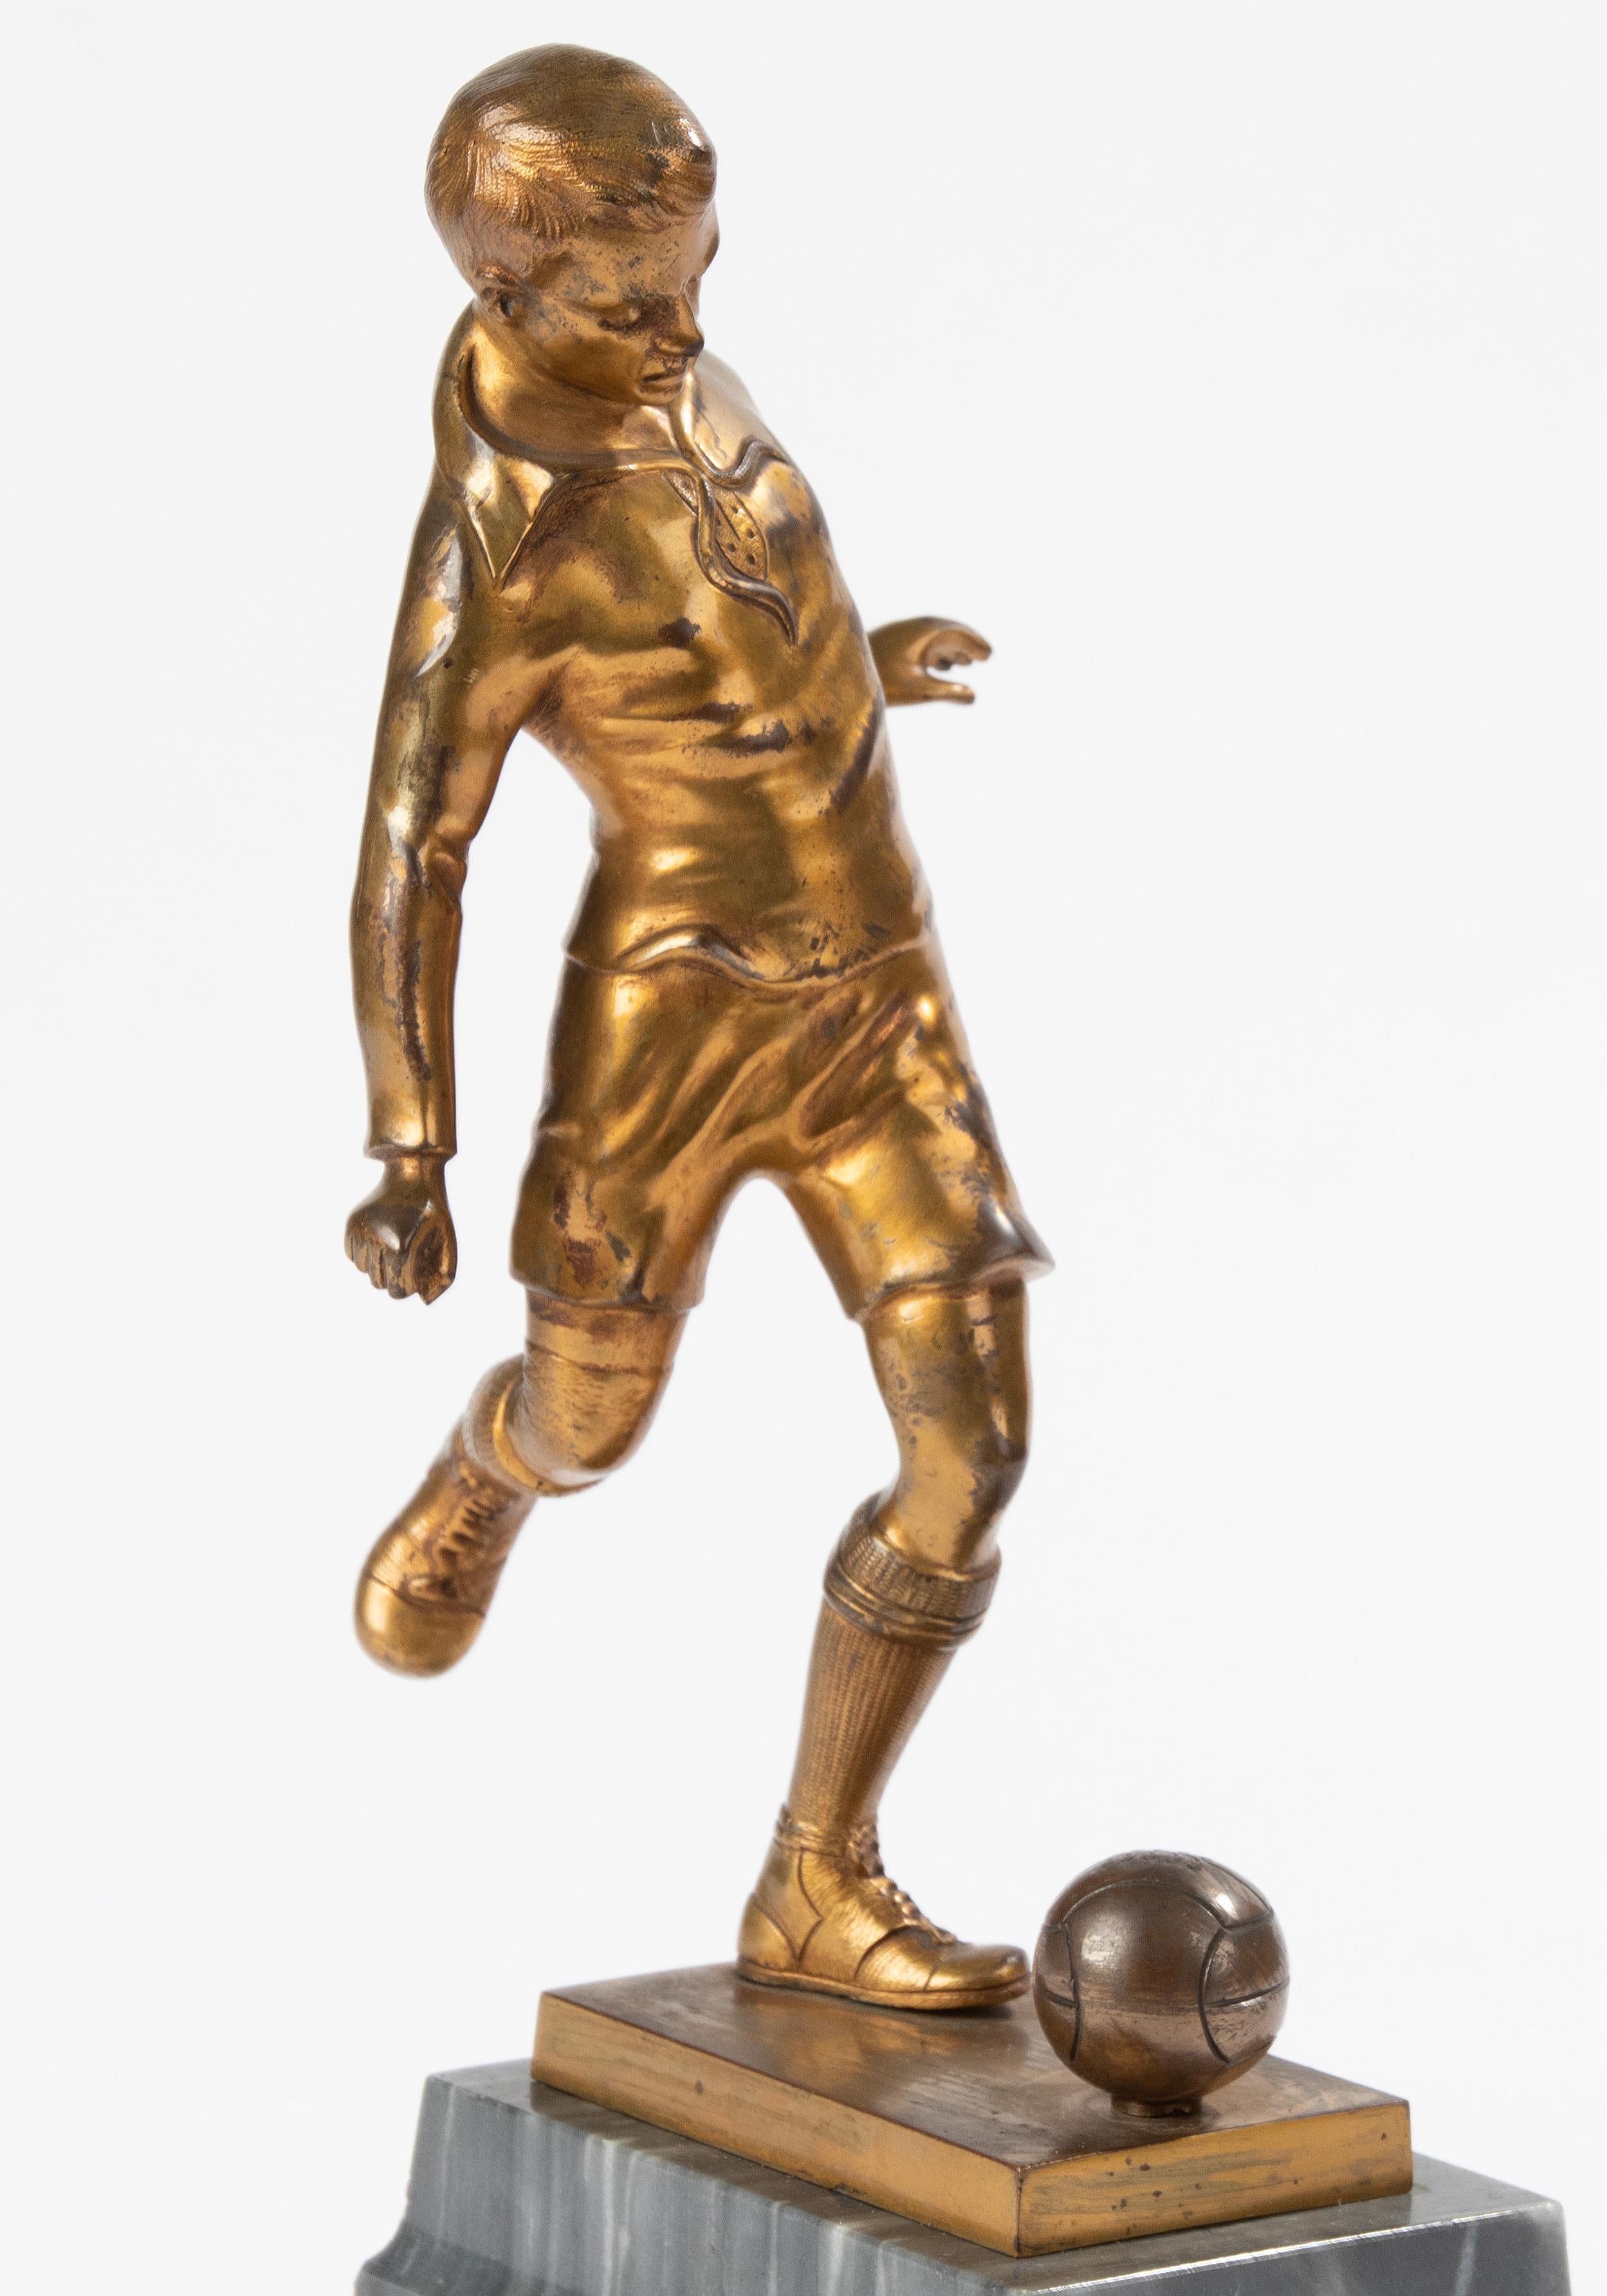 An Art Deco period sculpture of a football / soccer player. The sculpture is made of spelter (zinc alloy), with the original gilt patina. Resting on a 